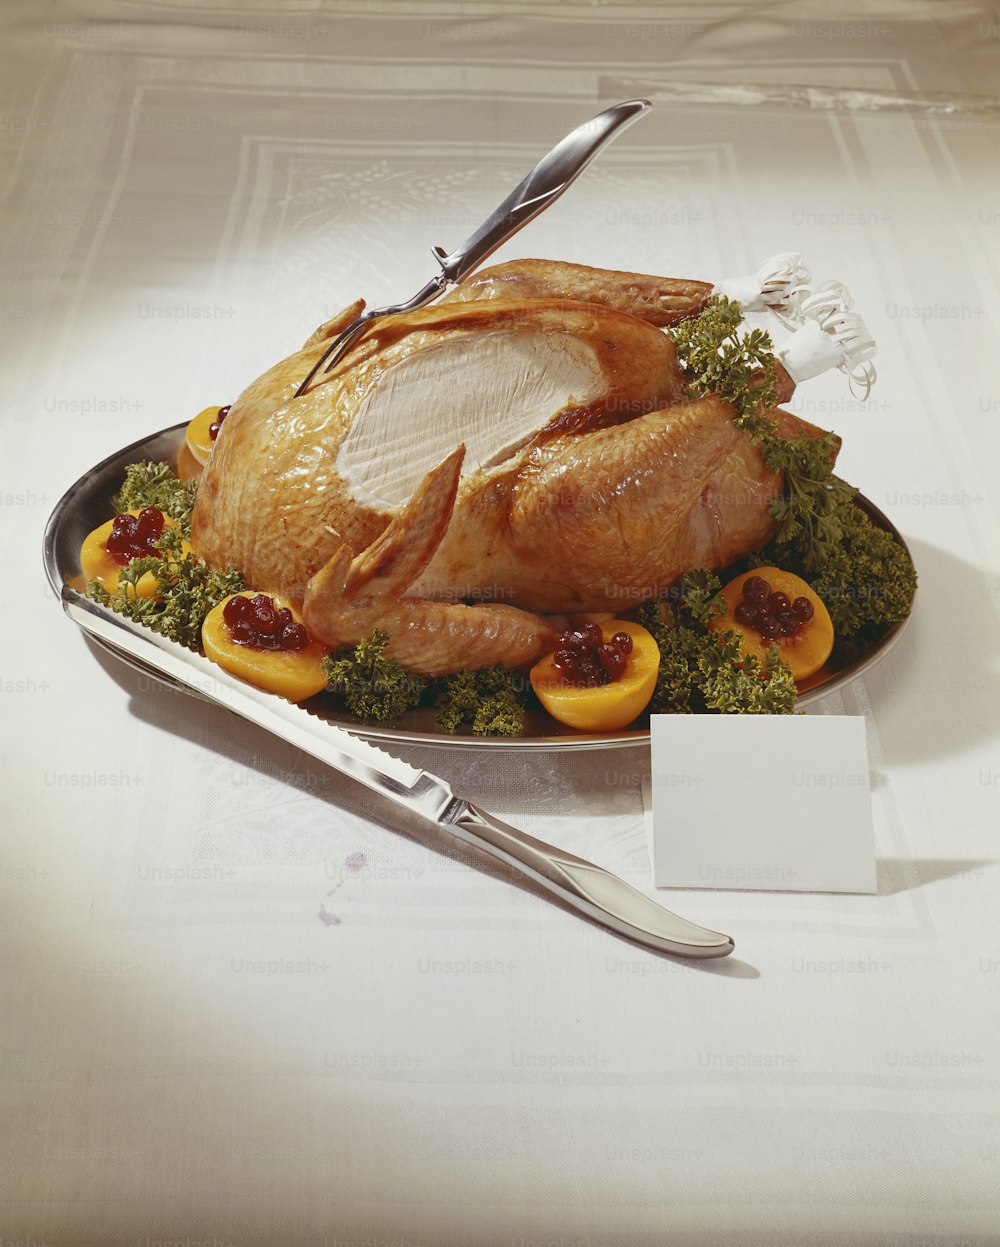 a turkey on a platter with a knife and fork